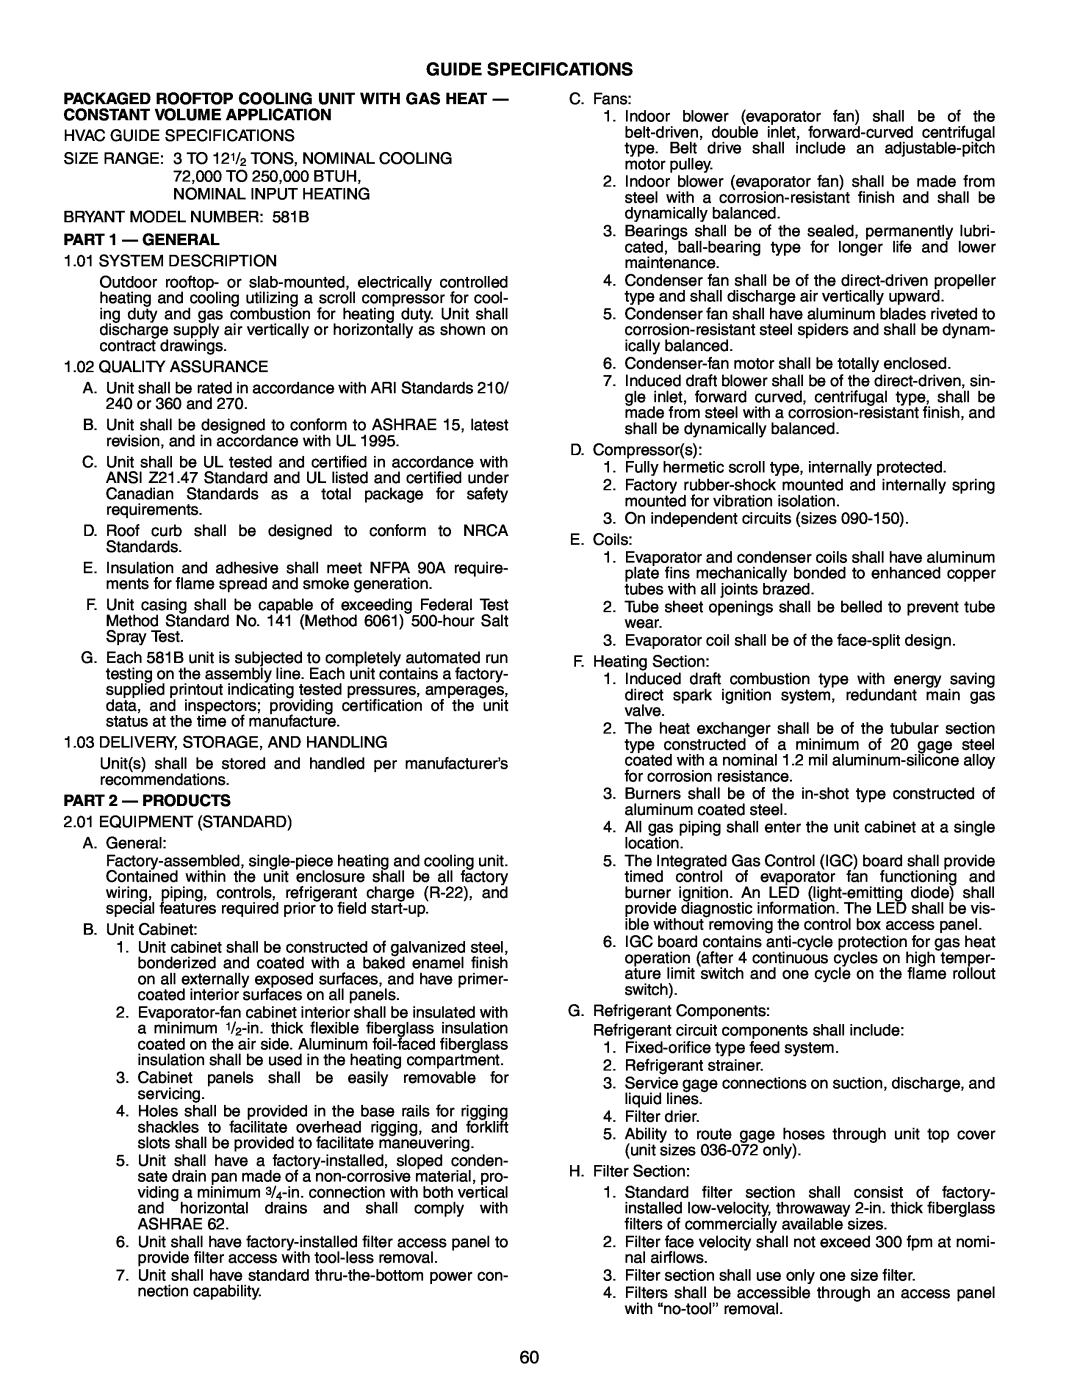 Bryant 581B manual Guide Specifications, PART 1 — GENERAL, PART 2 - PRODUCTS 